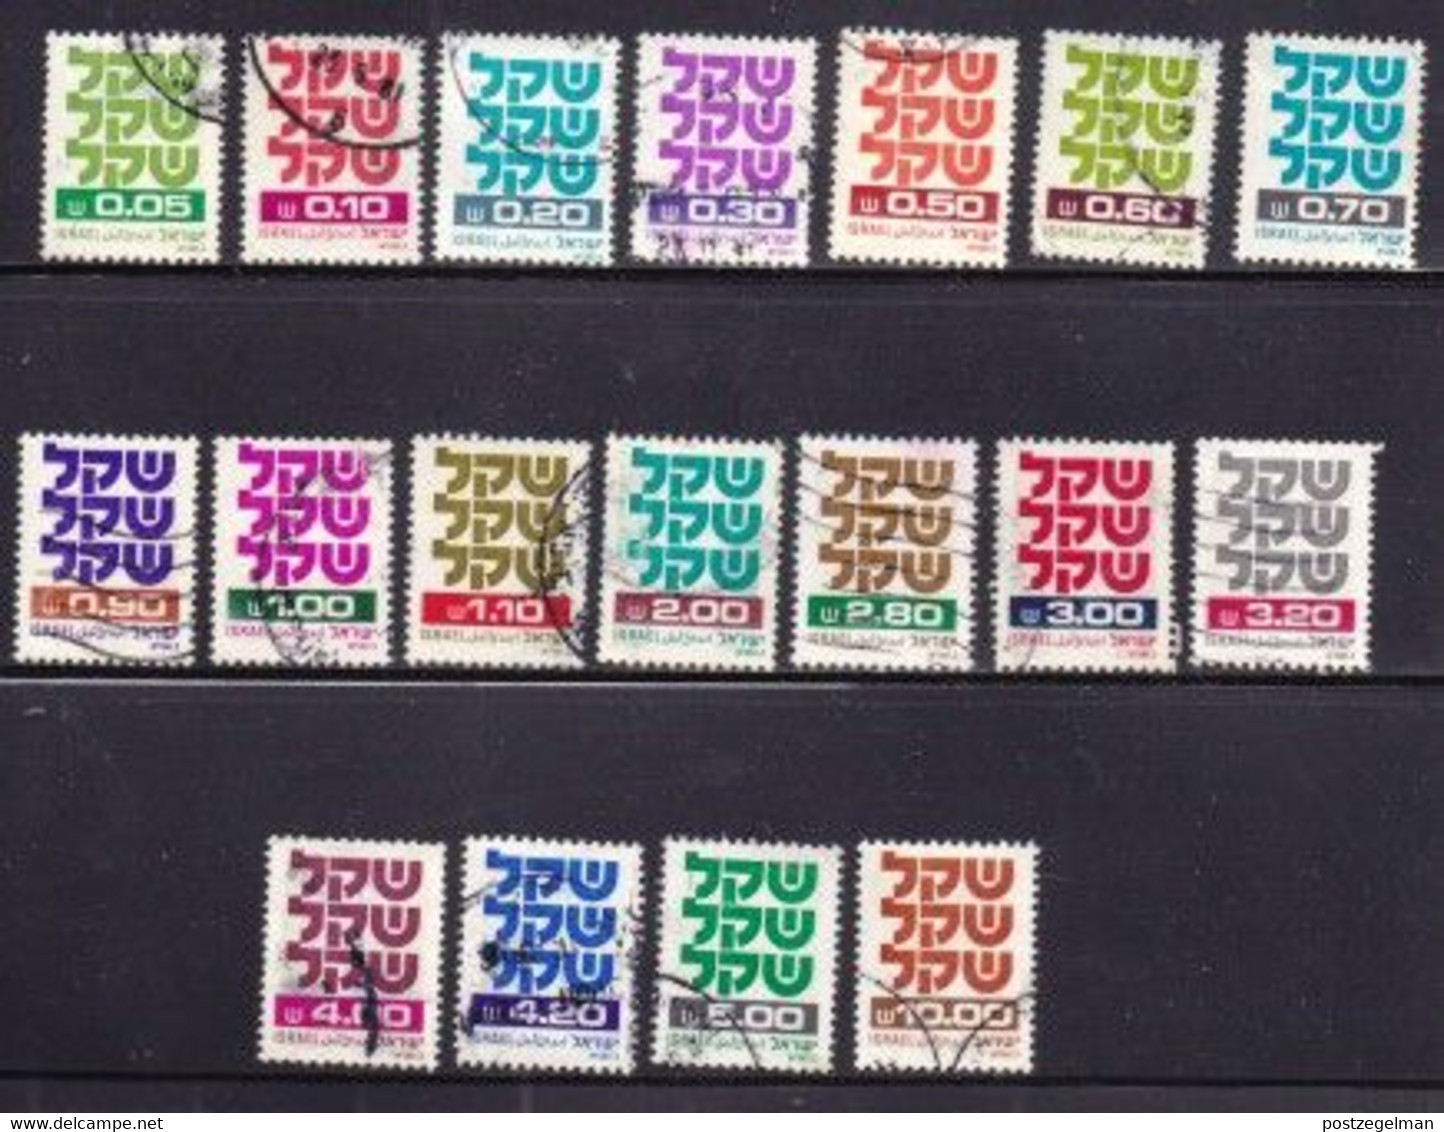 ISRAEL, 1980, Used Stamp(s)  Without  Tab, Shekel, SG Number(s) 784-802a, Scannr. 19206, 18 Values Only - Gebraucht (mit Tabs)